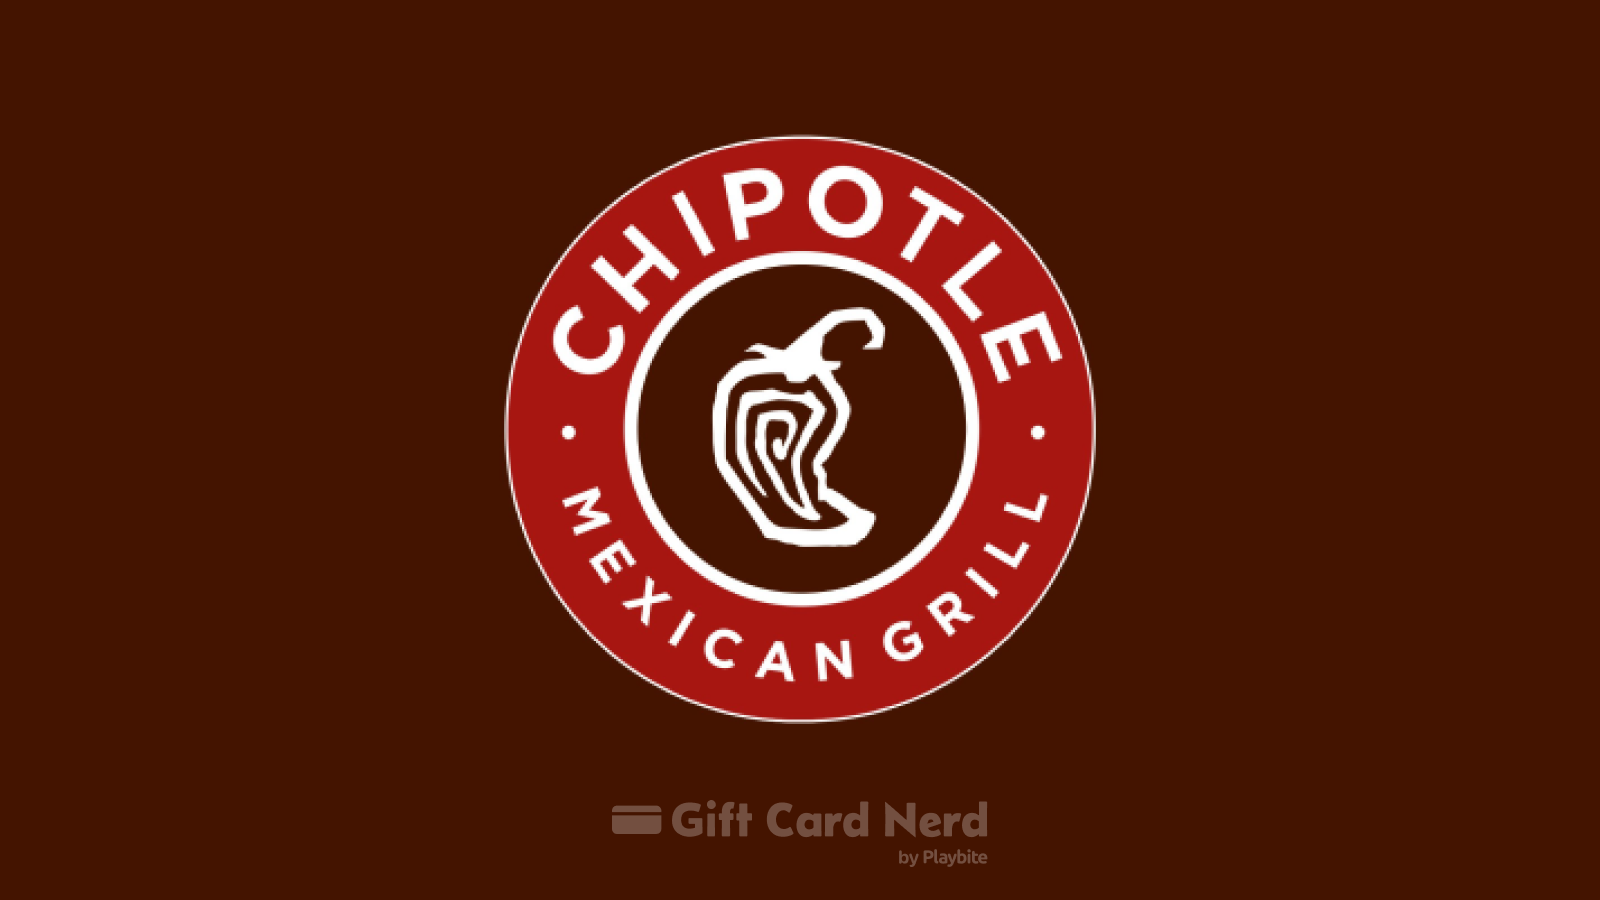 Can I Use a Chipotle Gift Card on Roblox?